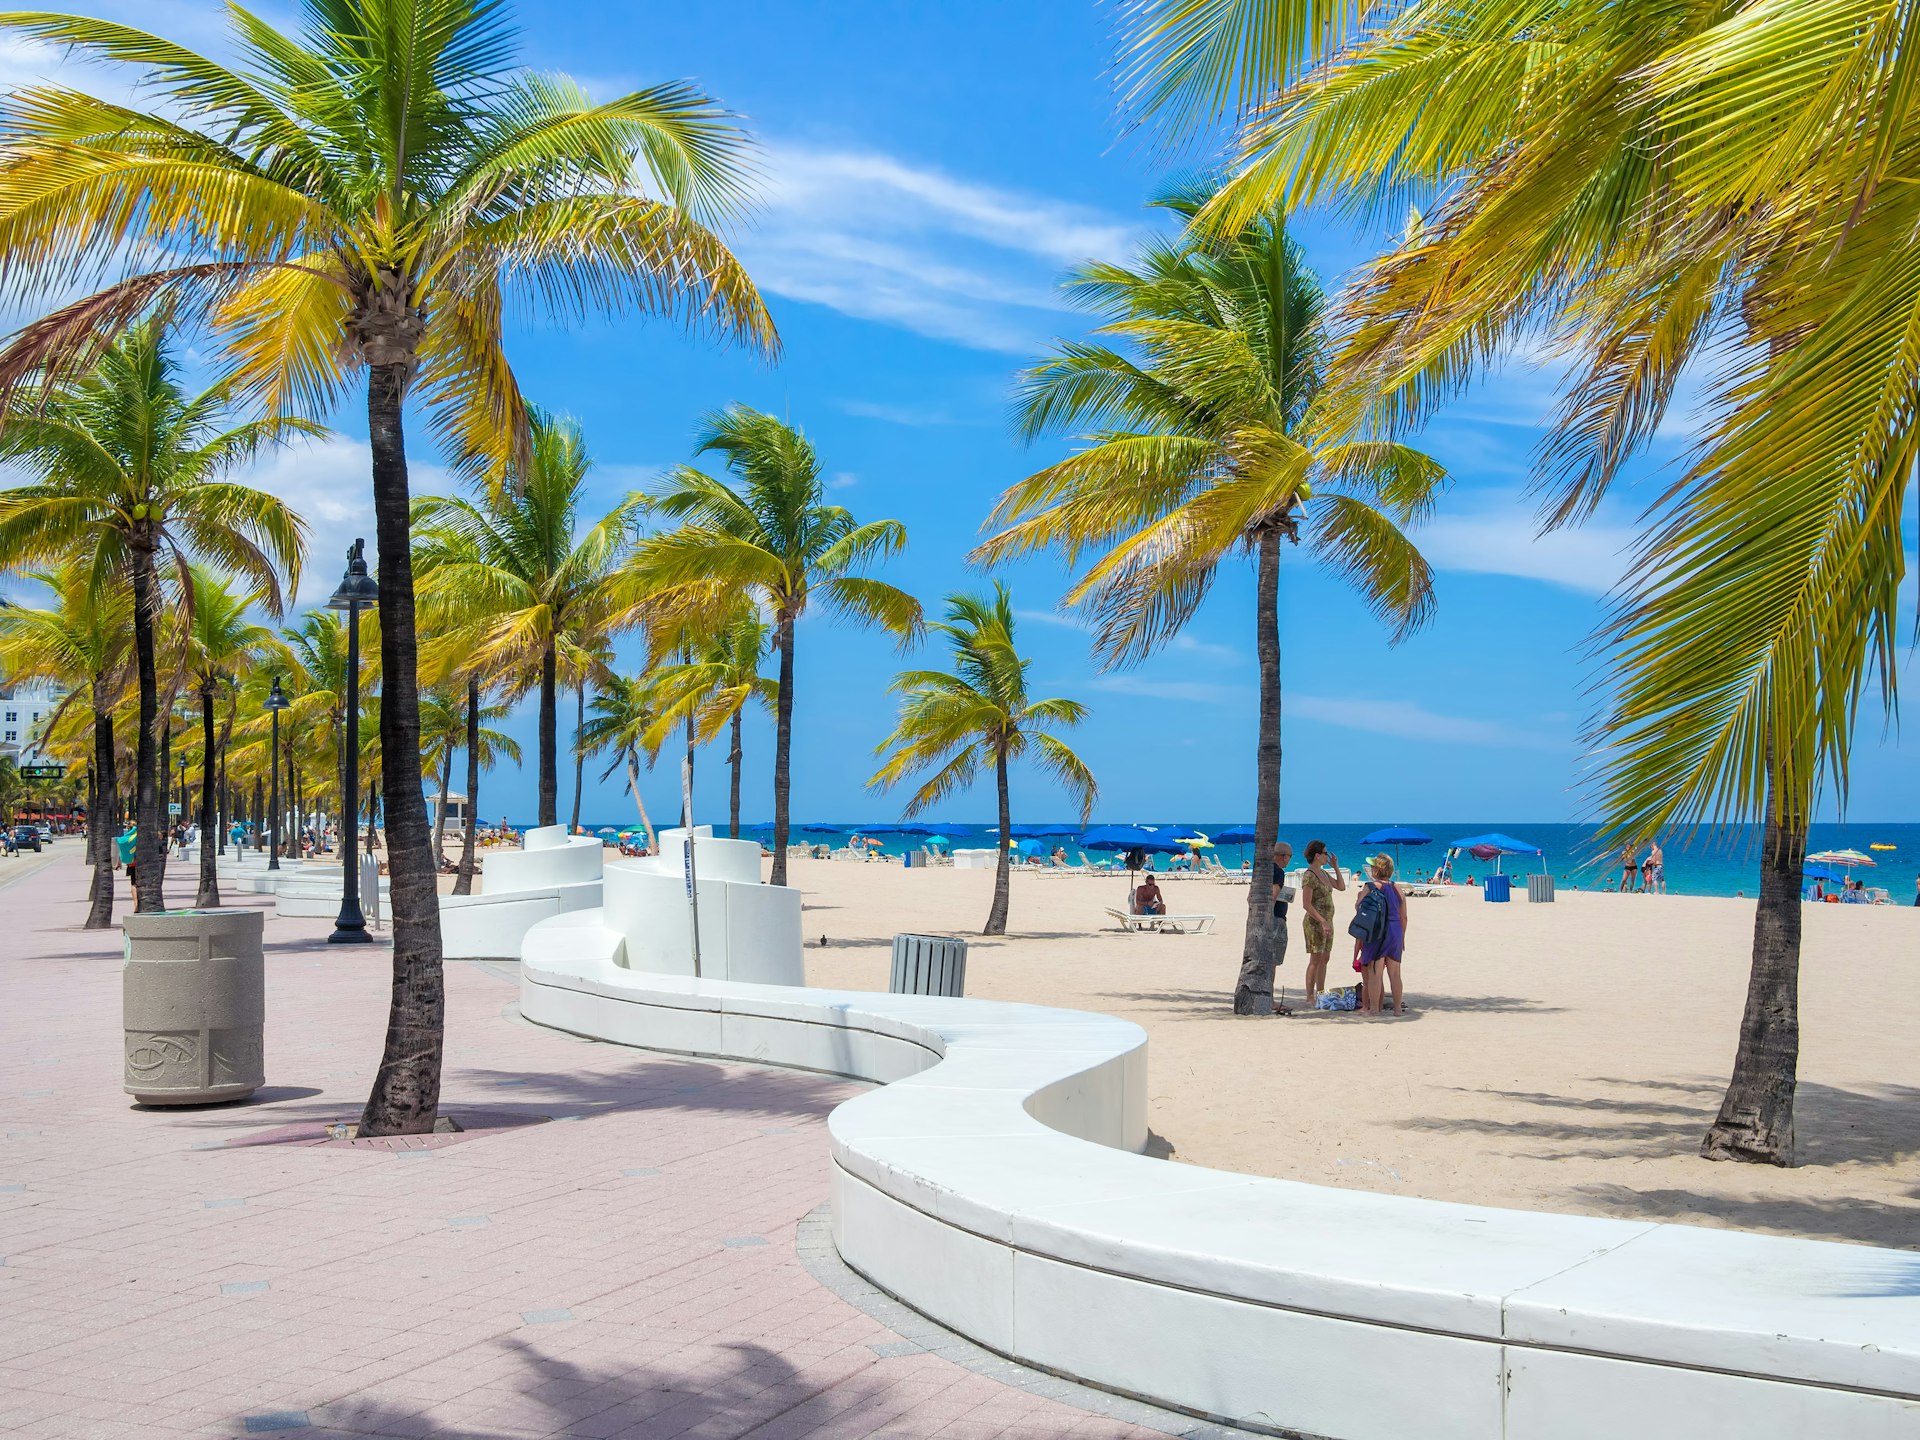 Palm trees shading beachgoers in Fort Lauderdale, Florida